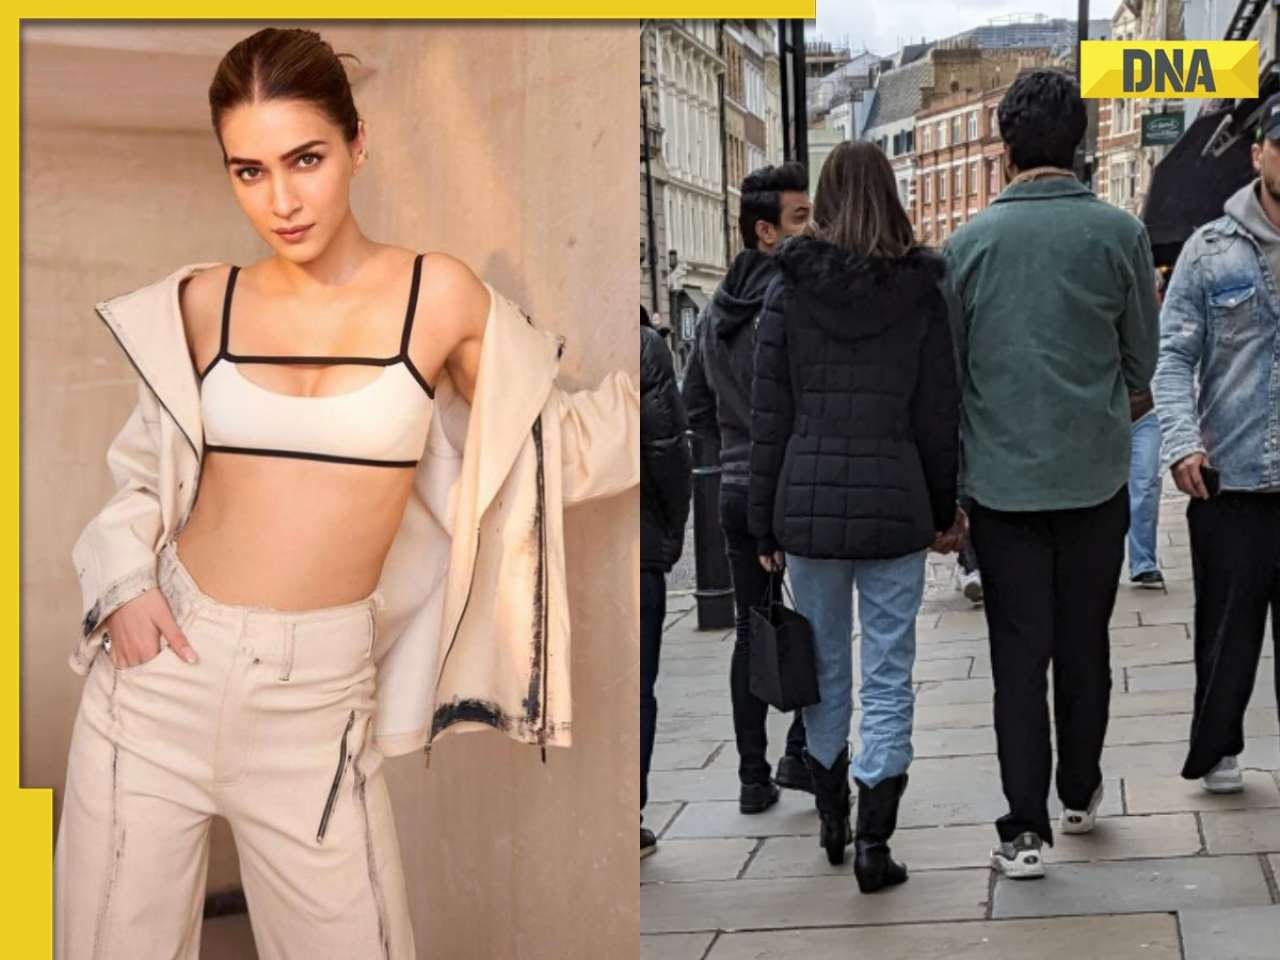 Kriti Sanon sparks dating rumours after her picture holding hands with mystery man in London goes viral